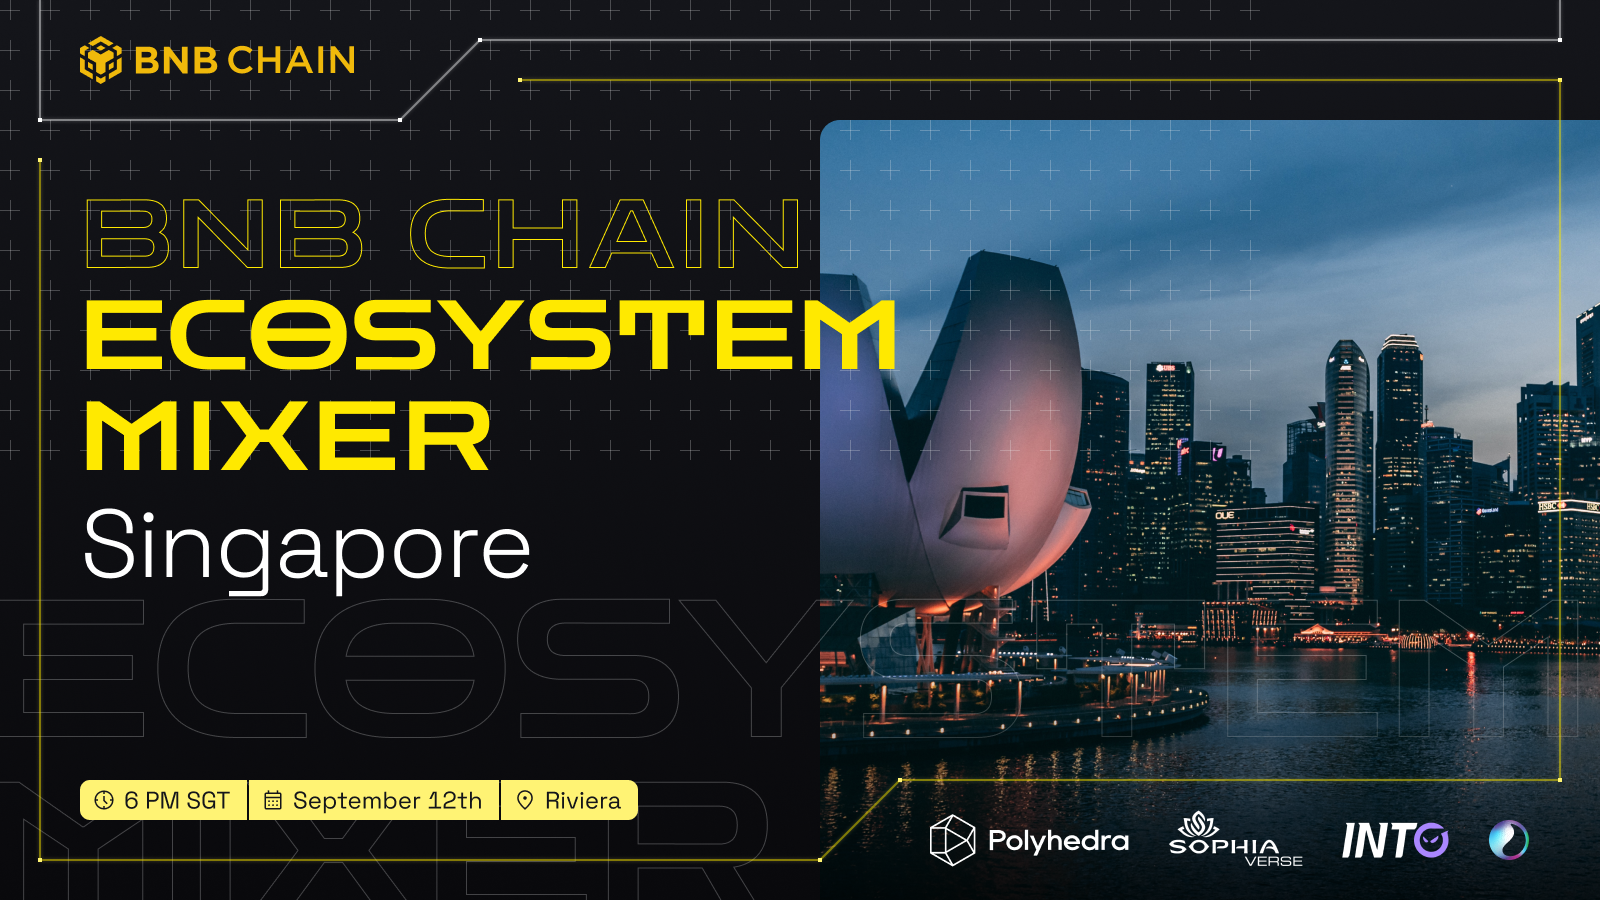 BNB Chain Ecosystem Mixer in Singapore: Let’s Connect & Learn!